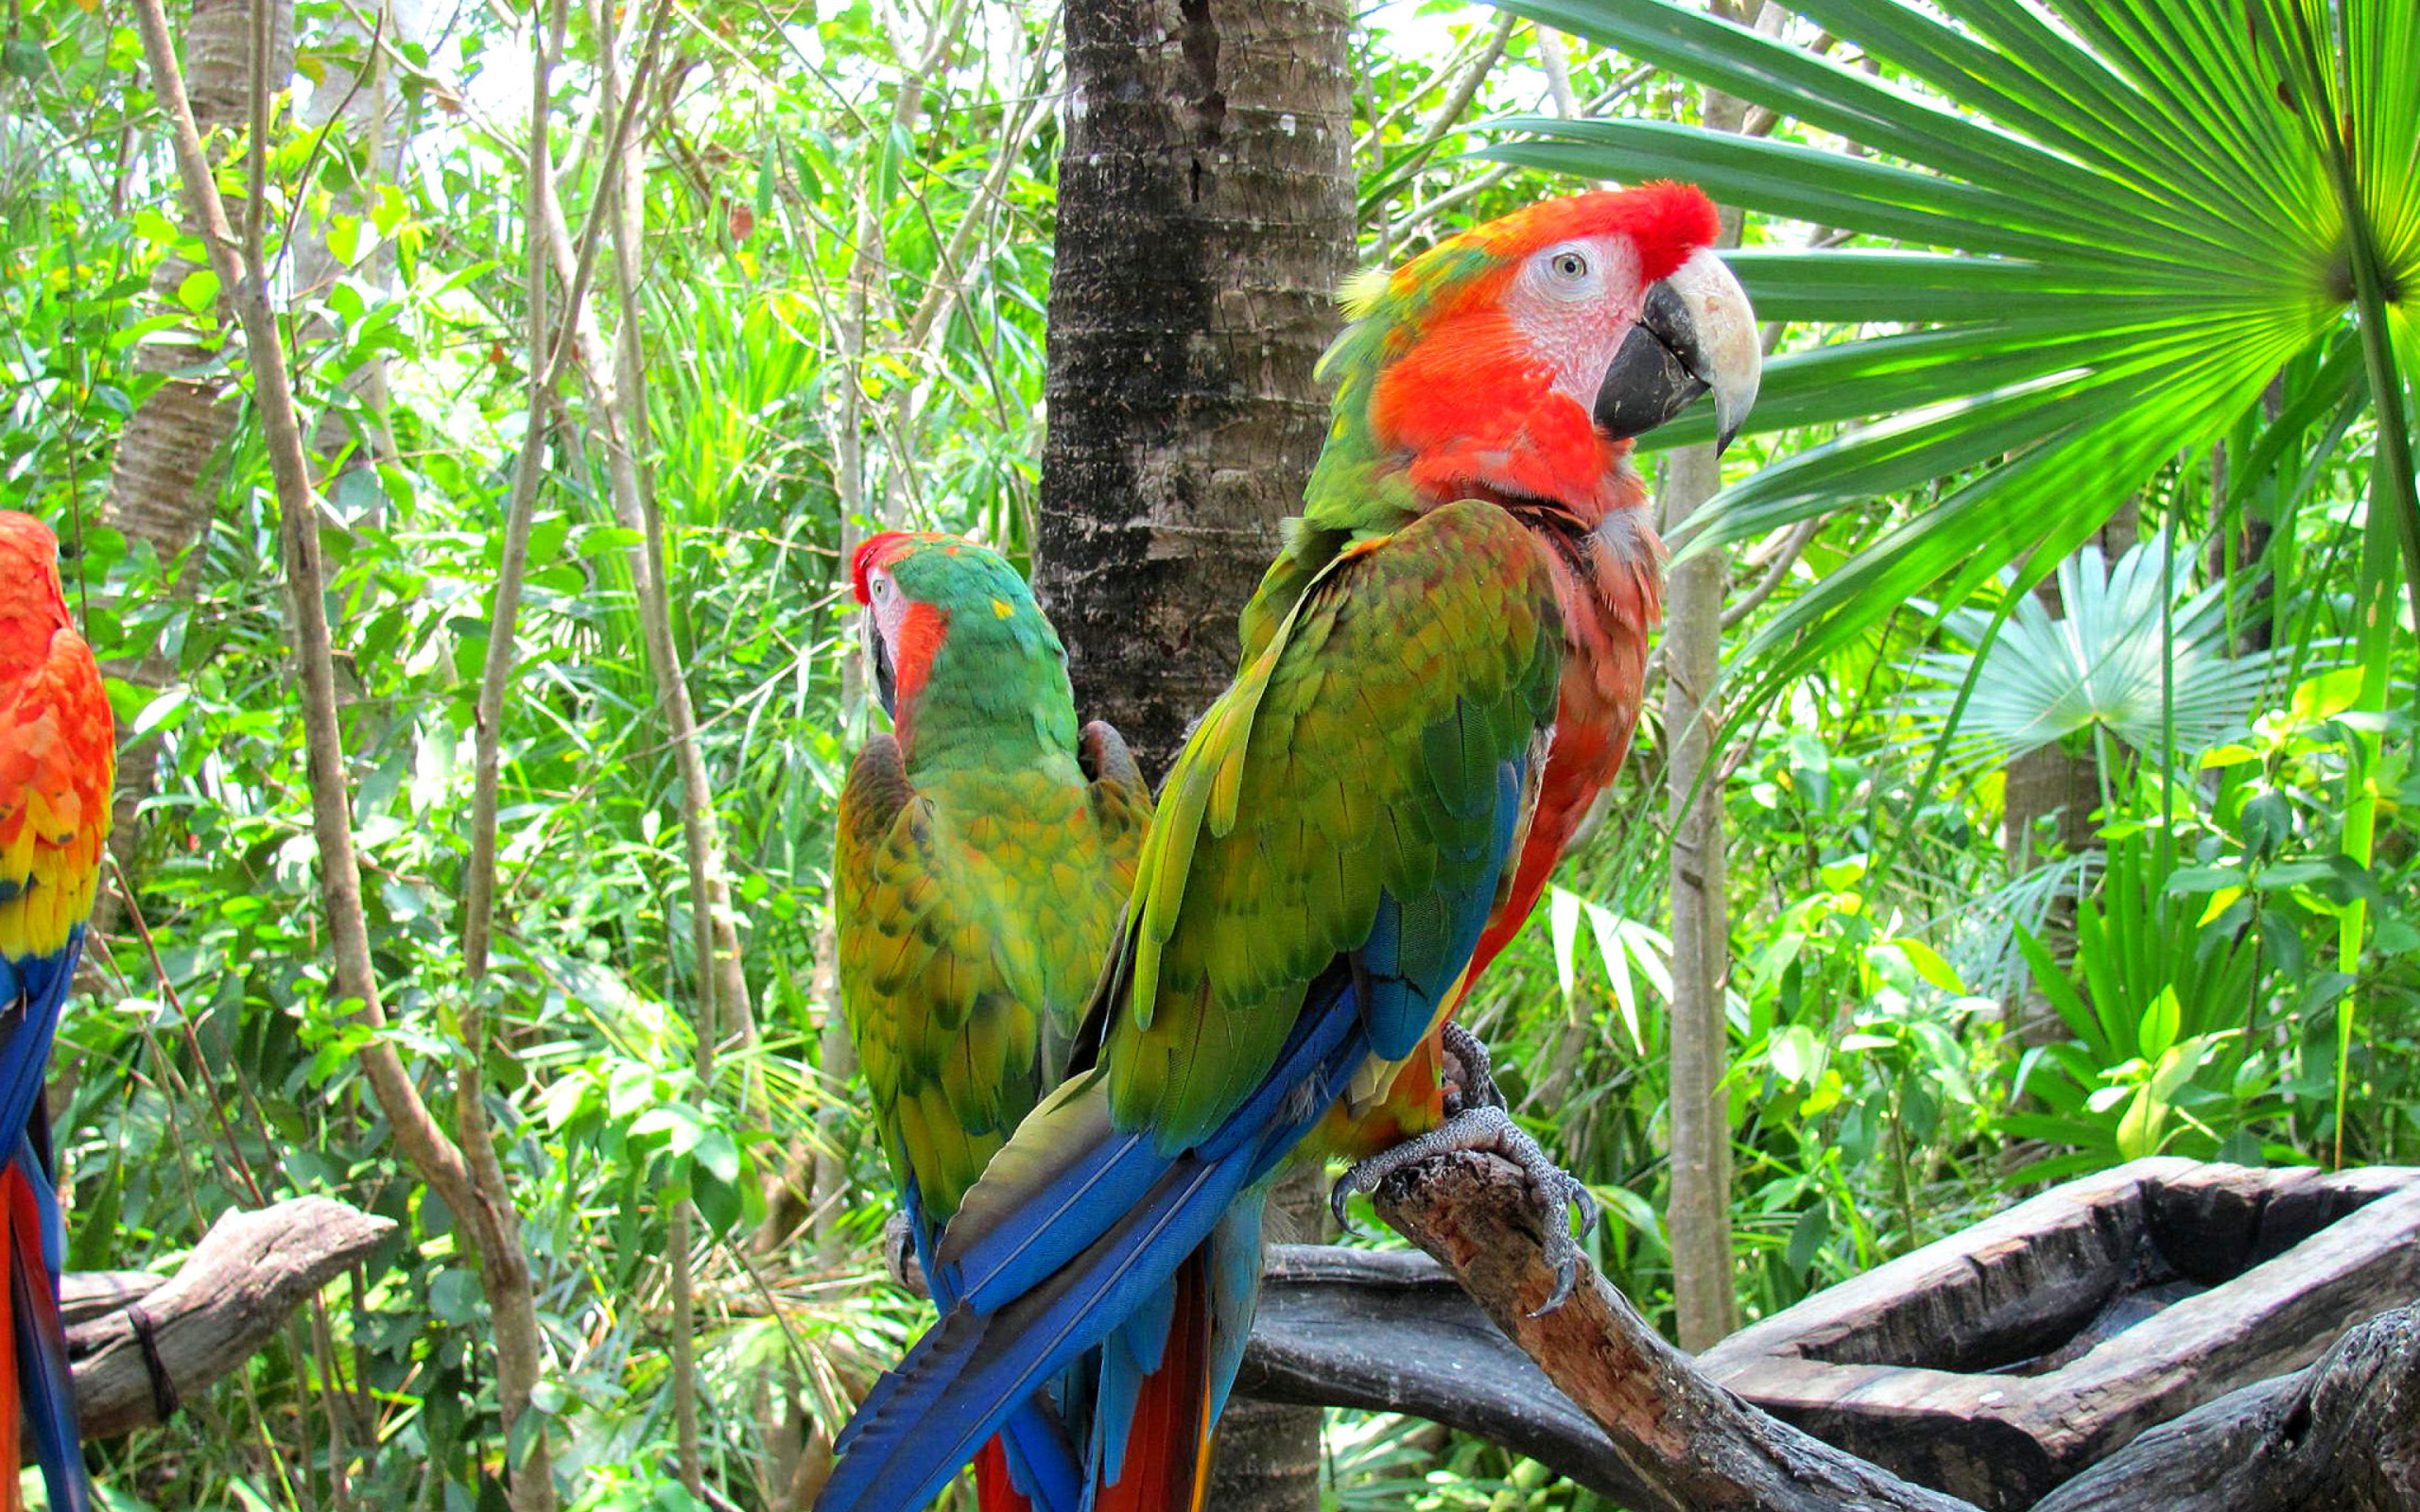 Macaw parrot Amazon forest screenshot #1 2560x1600